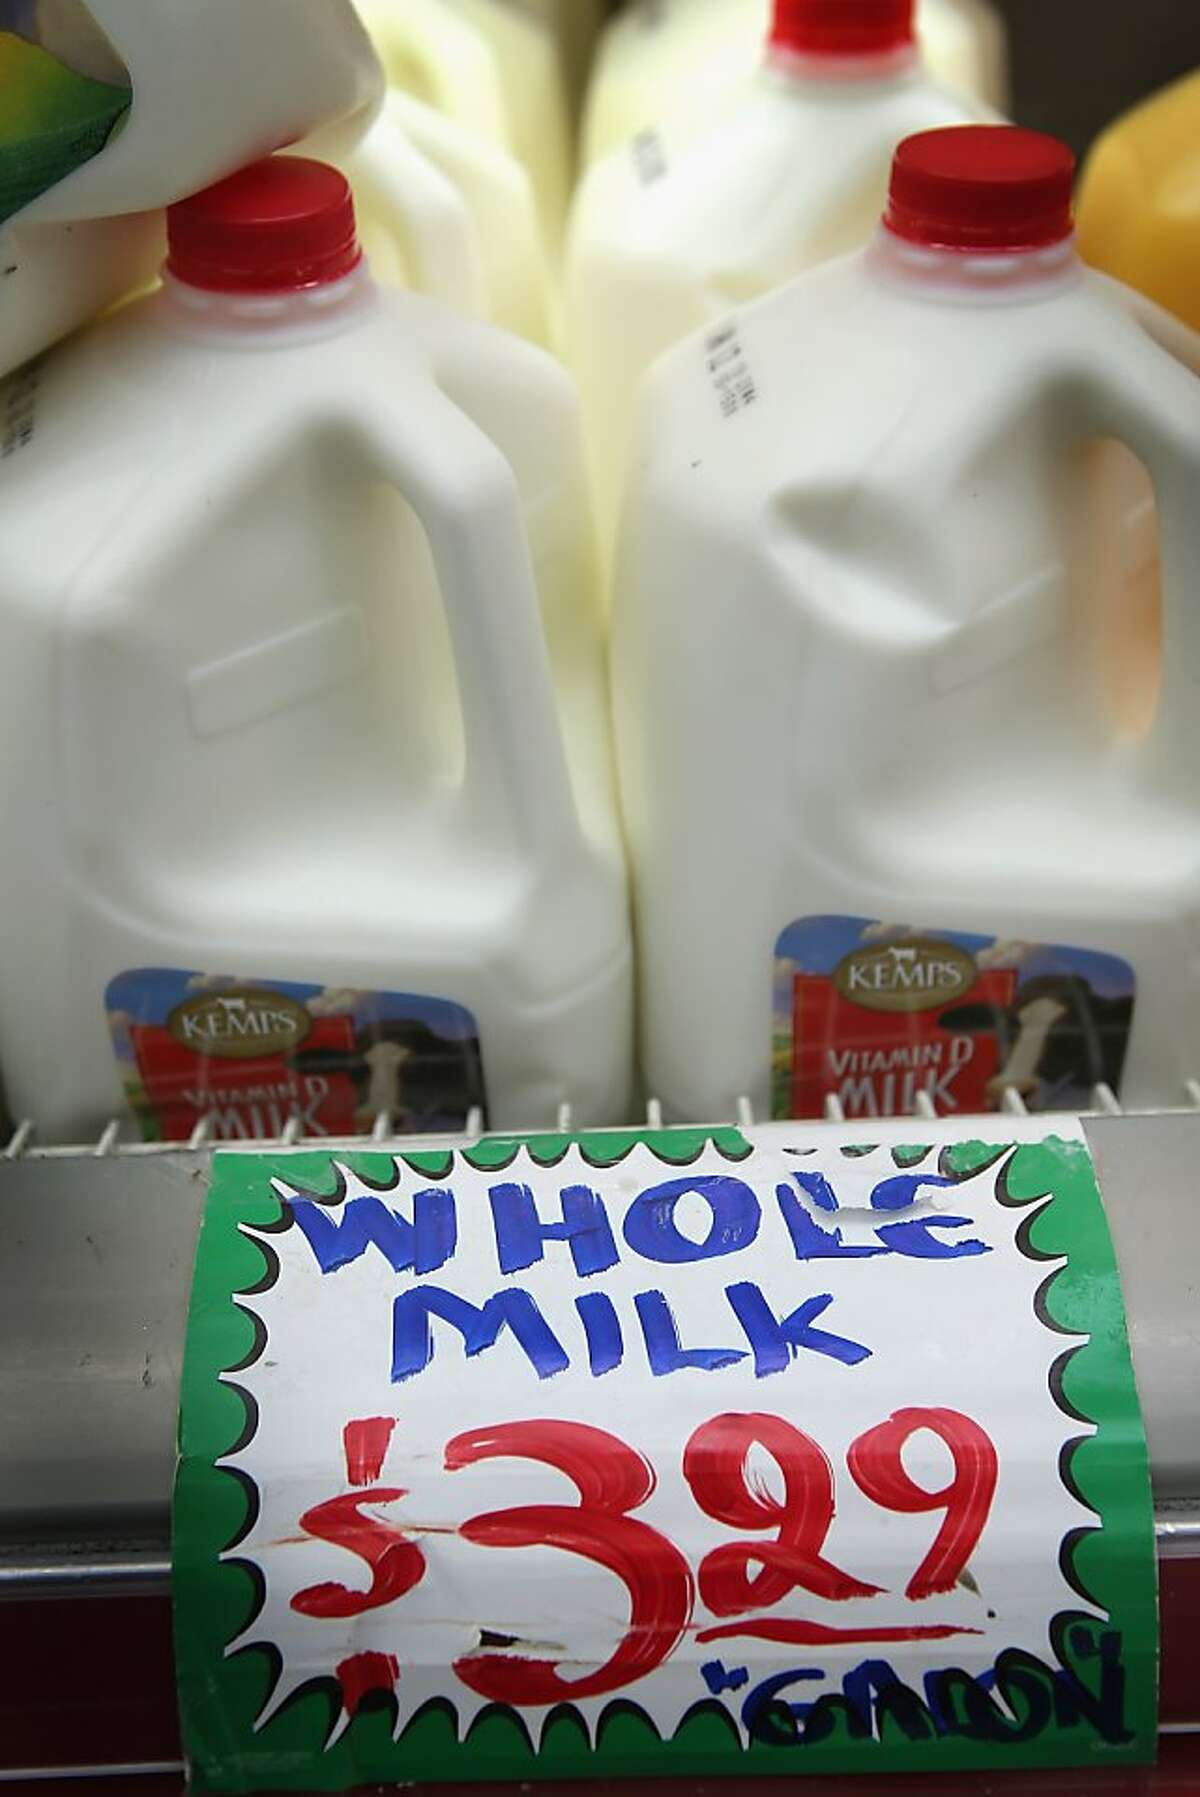 CHICAGO, IL - DECEMBER 27: Milk is offered for sale at a grocery store on December 27, 2012 in Chicago, Illinois. Milk prices could spike to $6 to $8 a gallon in January if lawmakers fail to reach a "fiscal cliff" deal and renew a Farm Bill that's been in place since 2008 and sets the price at which the government buys milk. (Photo by Scott Olson/Getty Images)